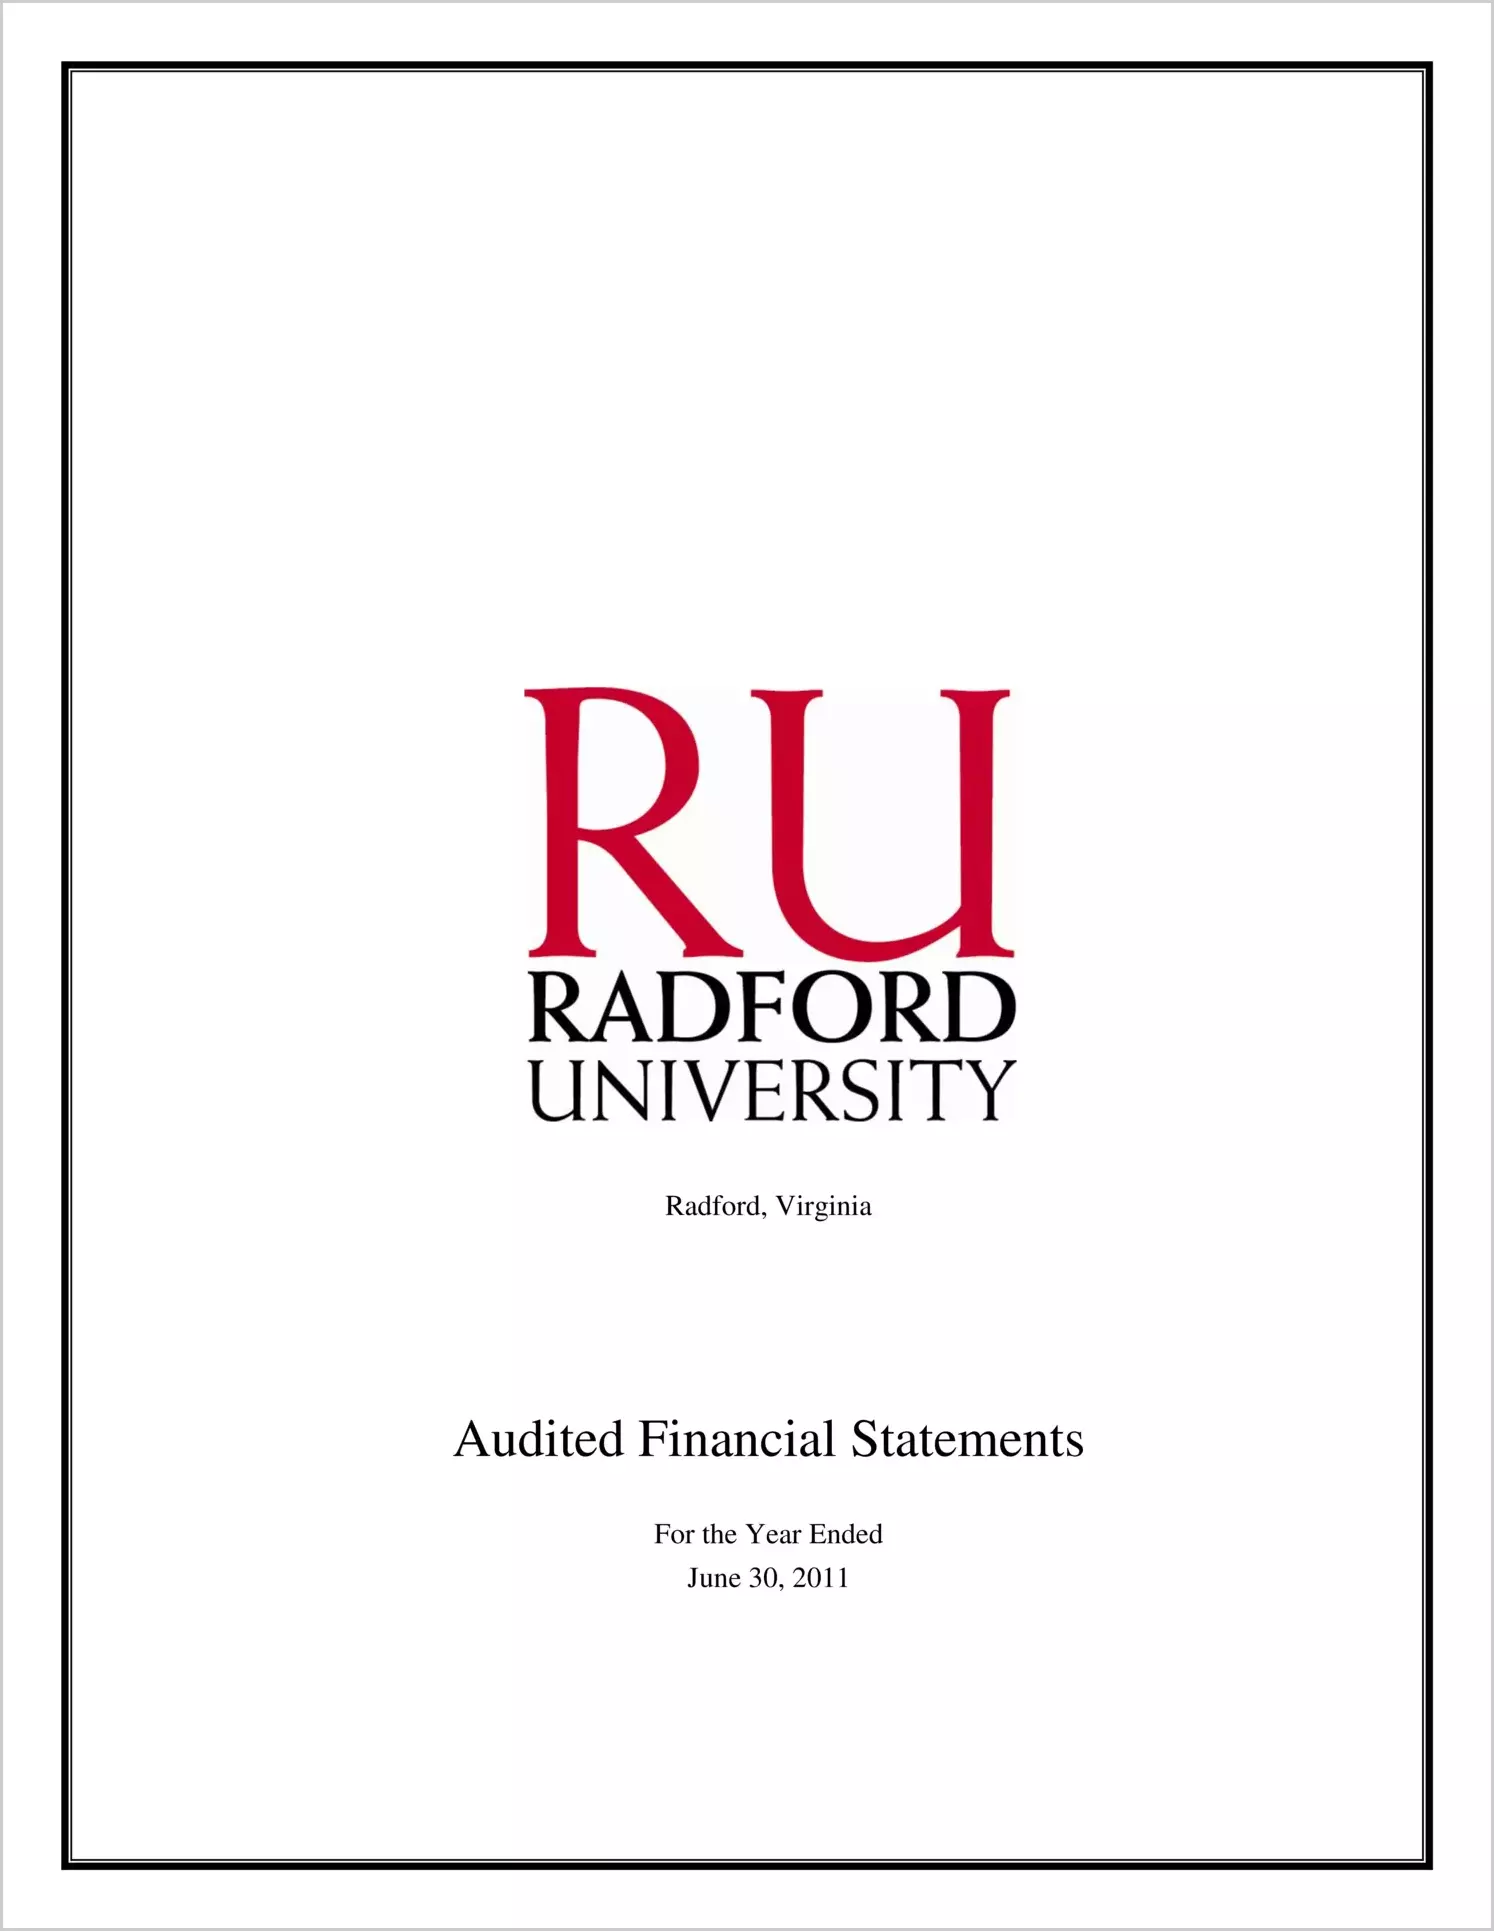 Radford University Financial Statements report on audit for year ending June 30, 2011